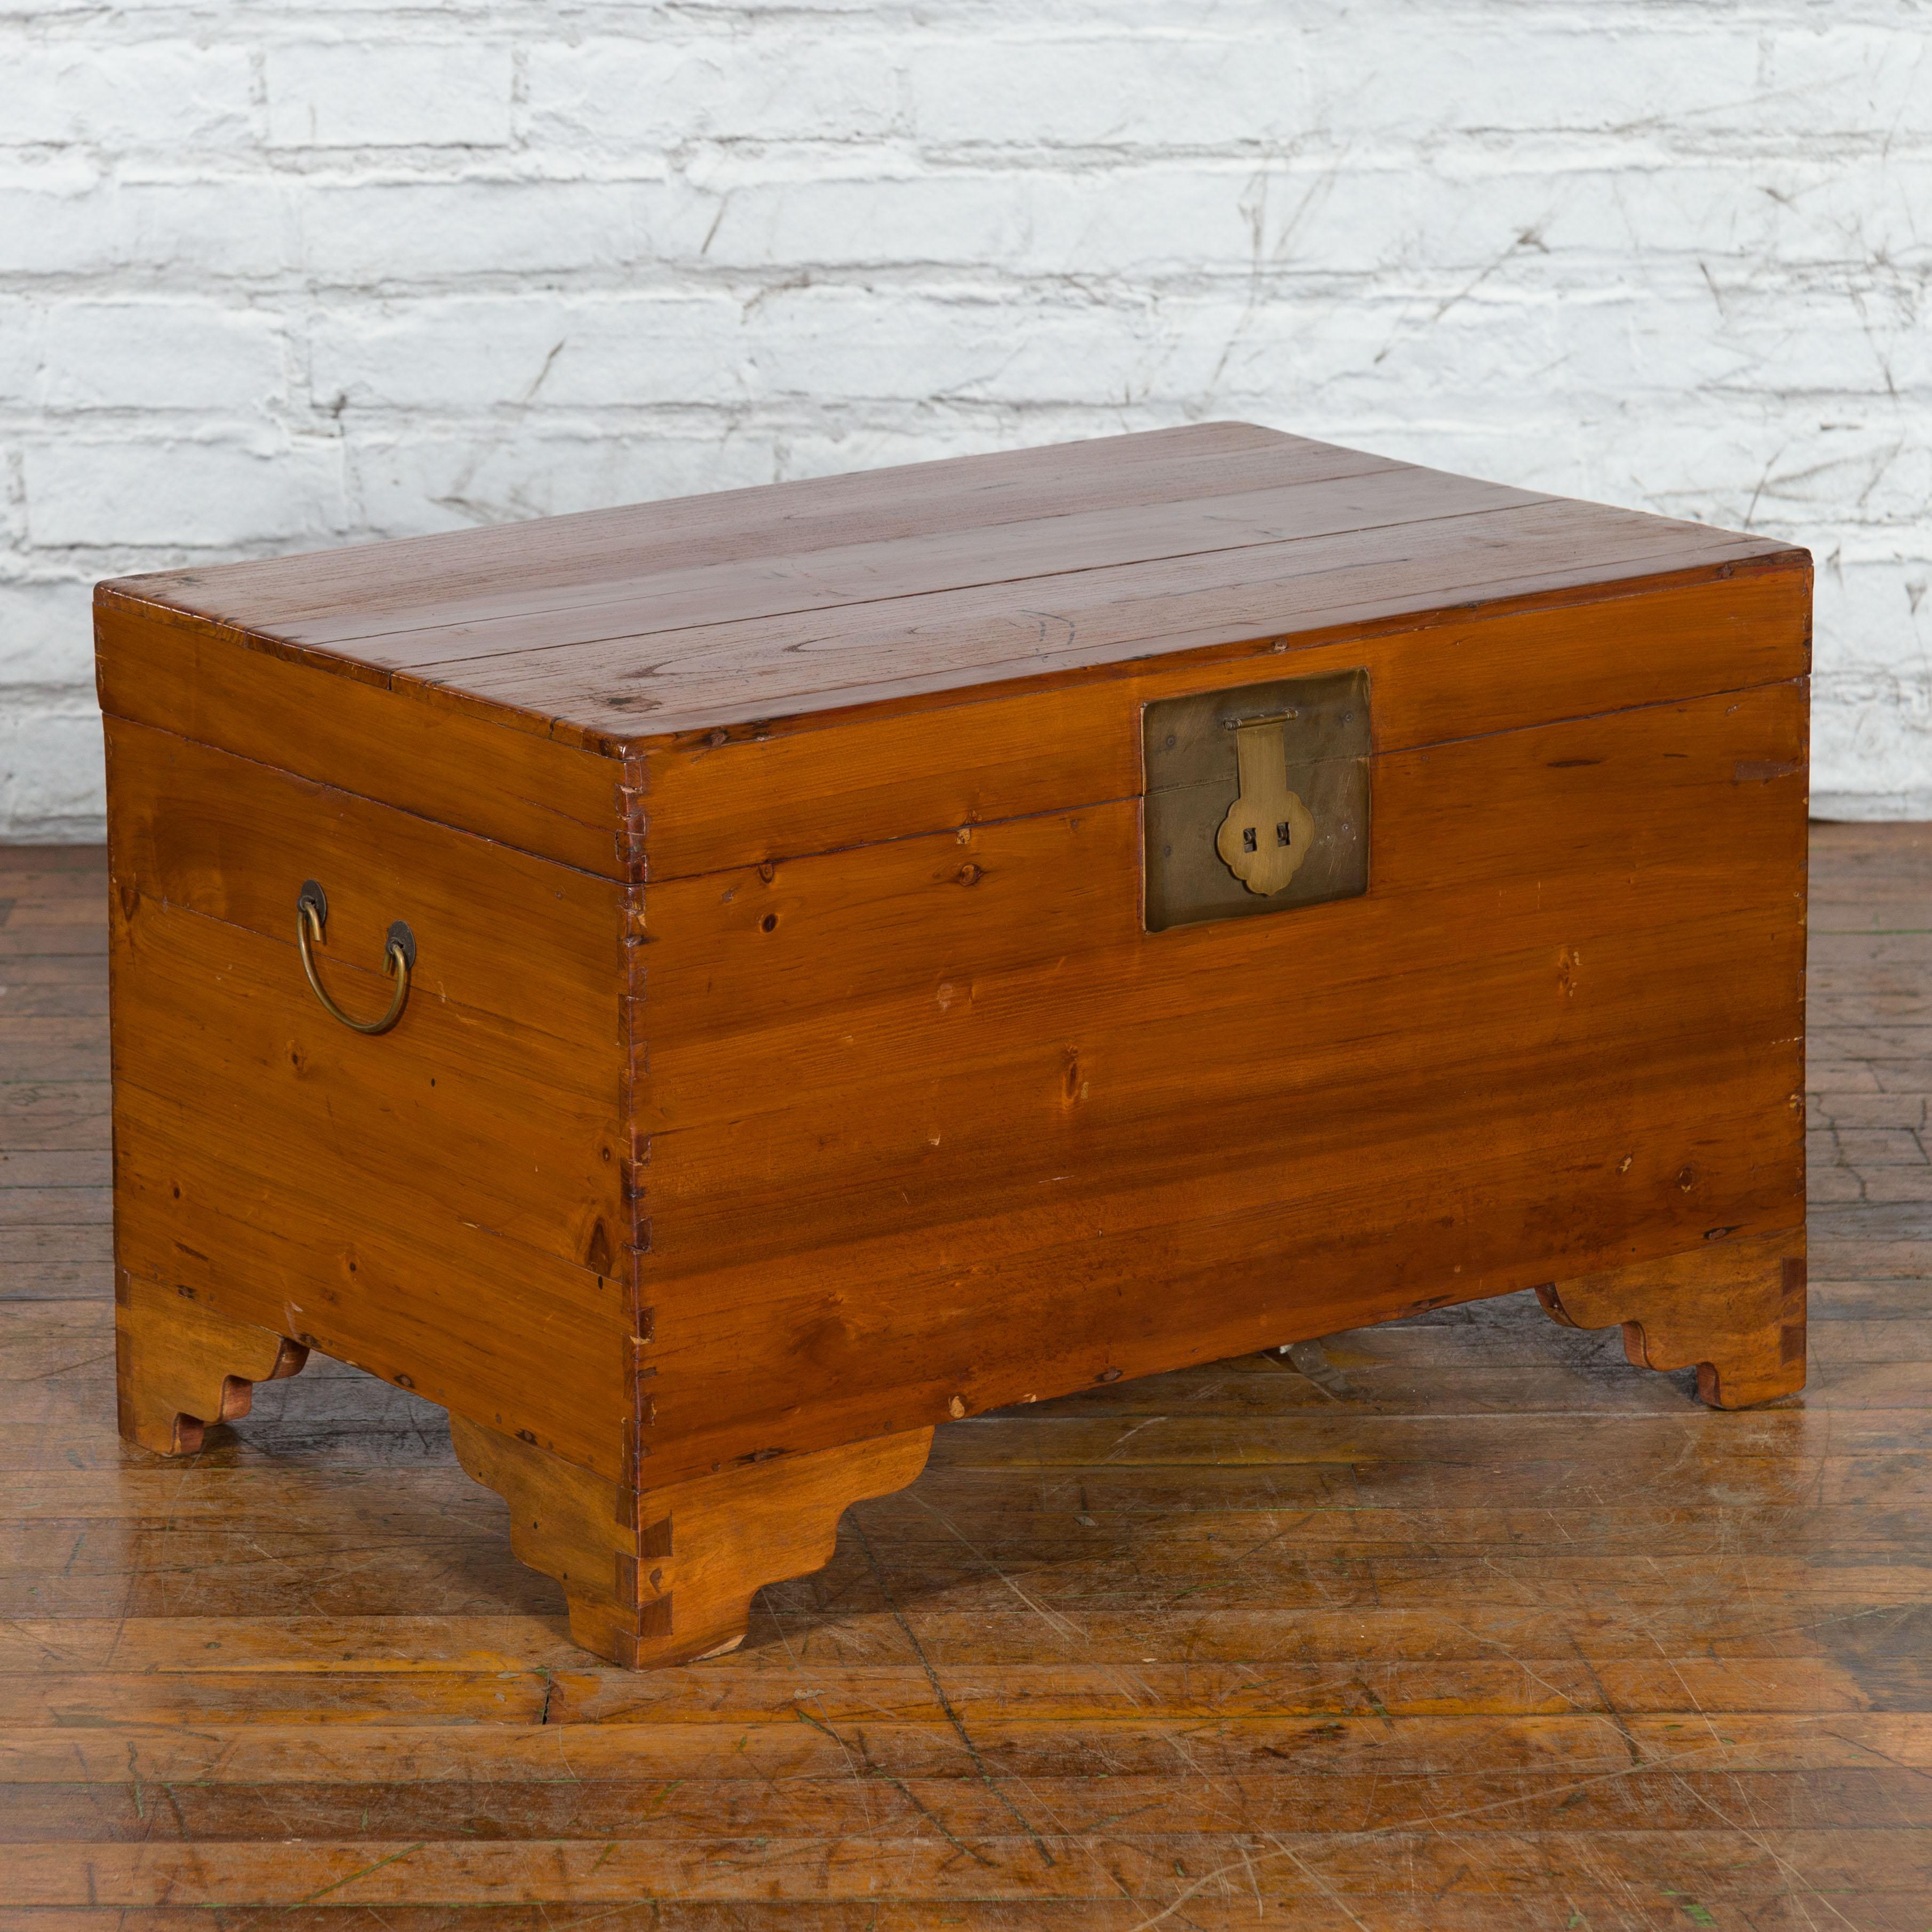 A Chinese late Qing Dynasty period refinished pine chest from the early 20th century, with carved feet and brass hardware. Created in China during the late Qing Dynasty period in the early years of the 20th century, this versatile piece would be